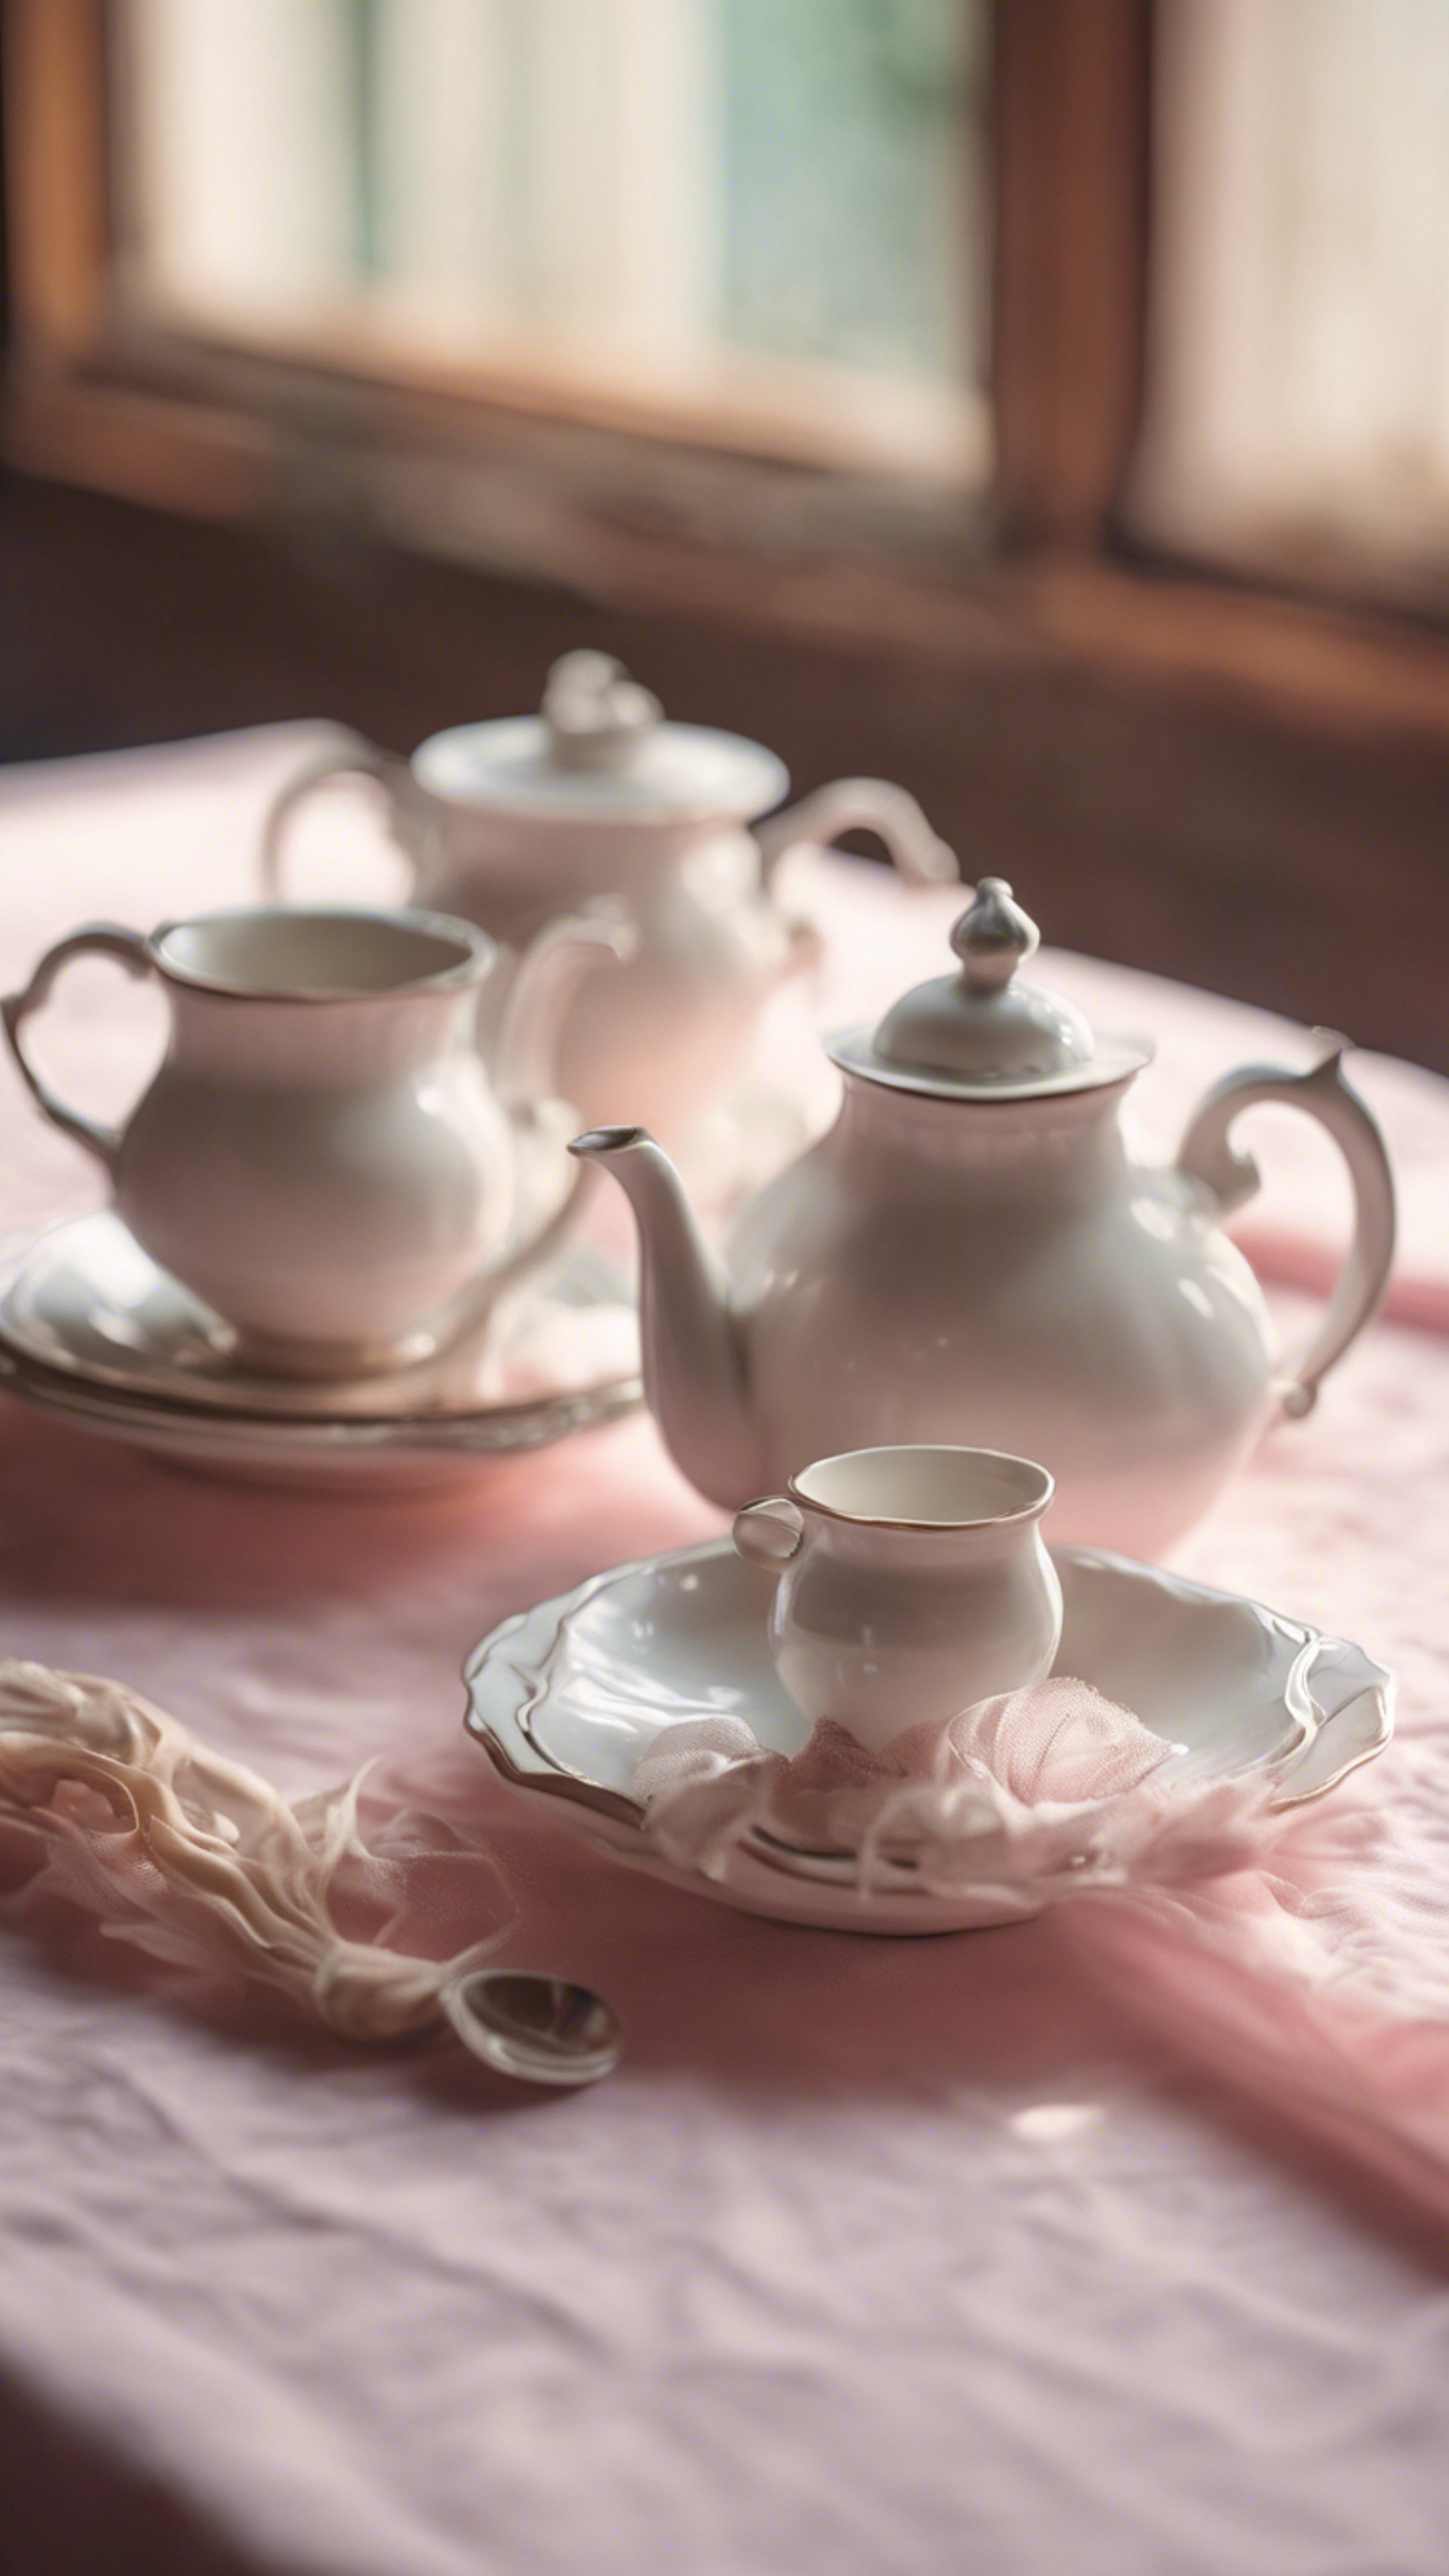 A vintage white tea set, arranged on a fluffy pastel pink tablecloth in a charming, old-world kitchen. Wallpaper[519305883ddb44018966]